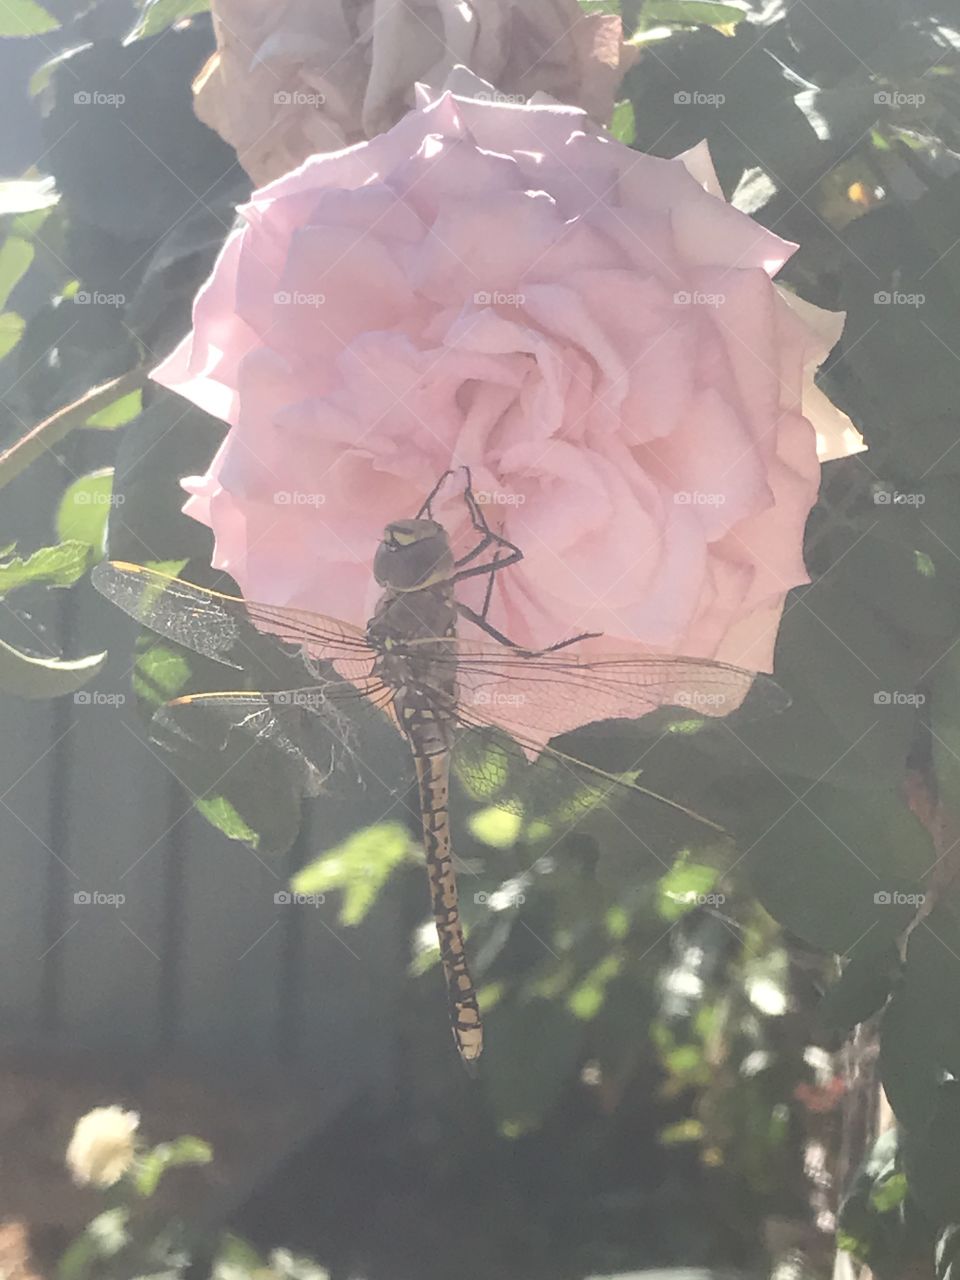 Dragonfly on rose 🌹 